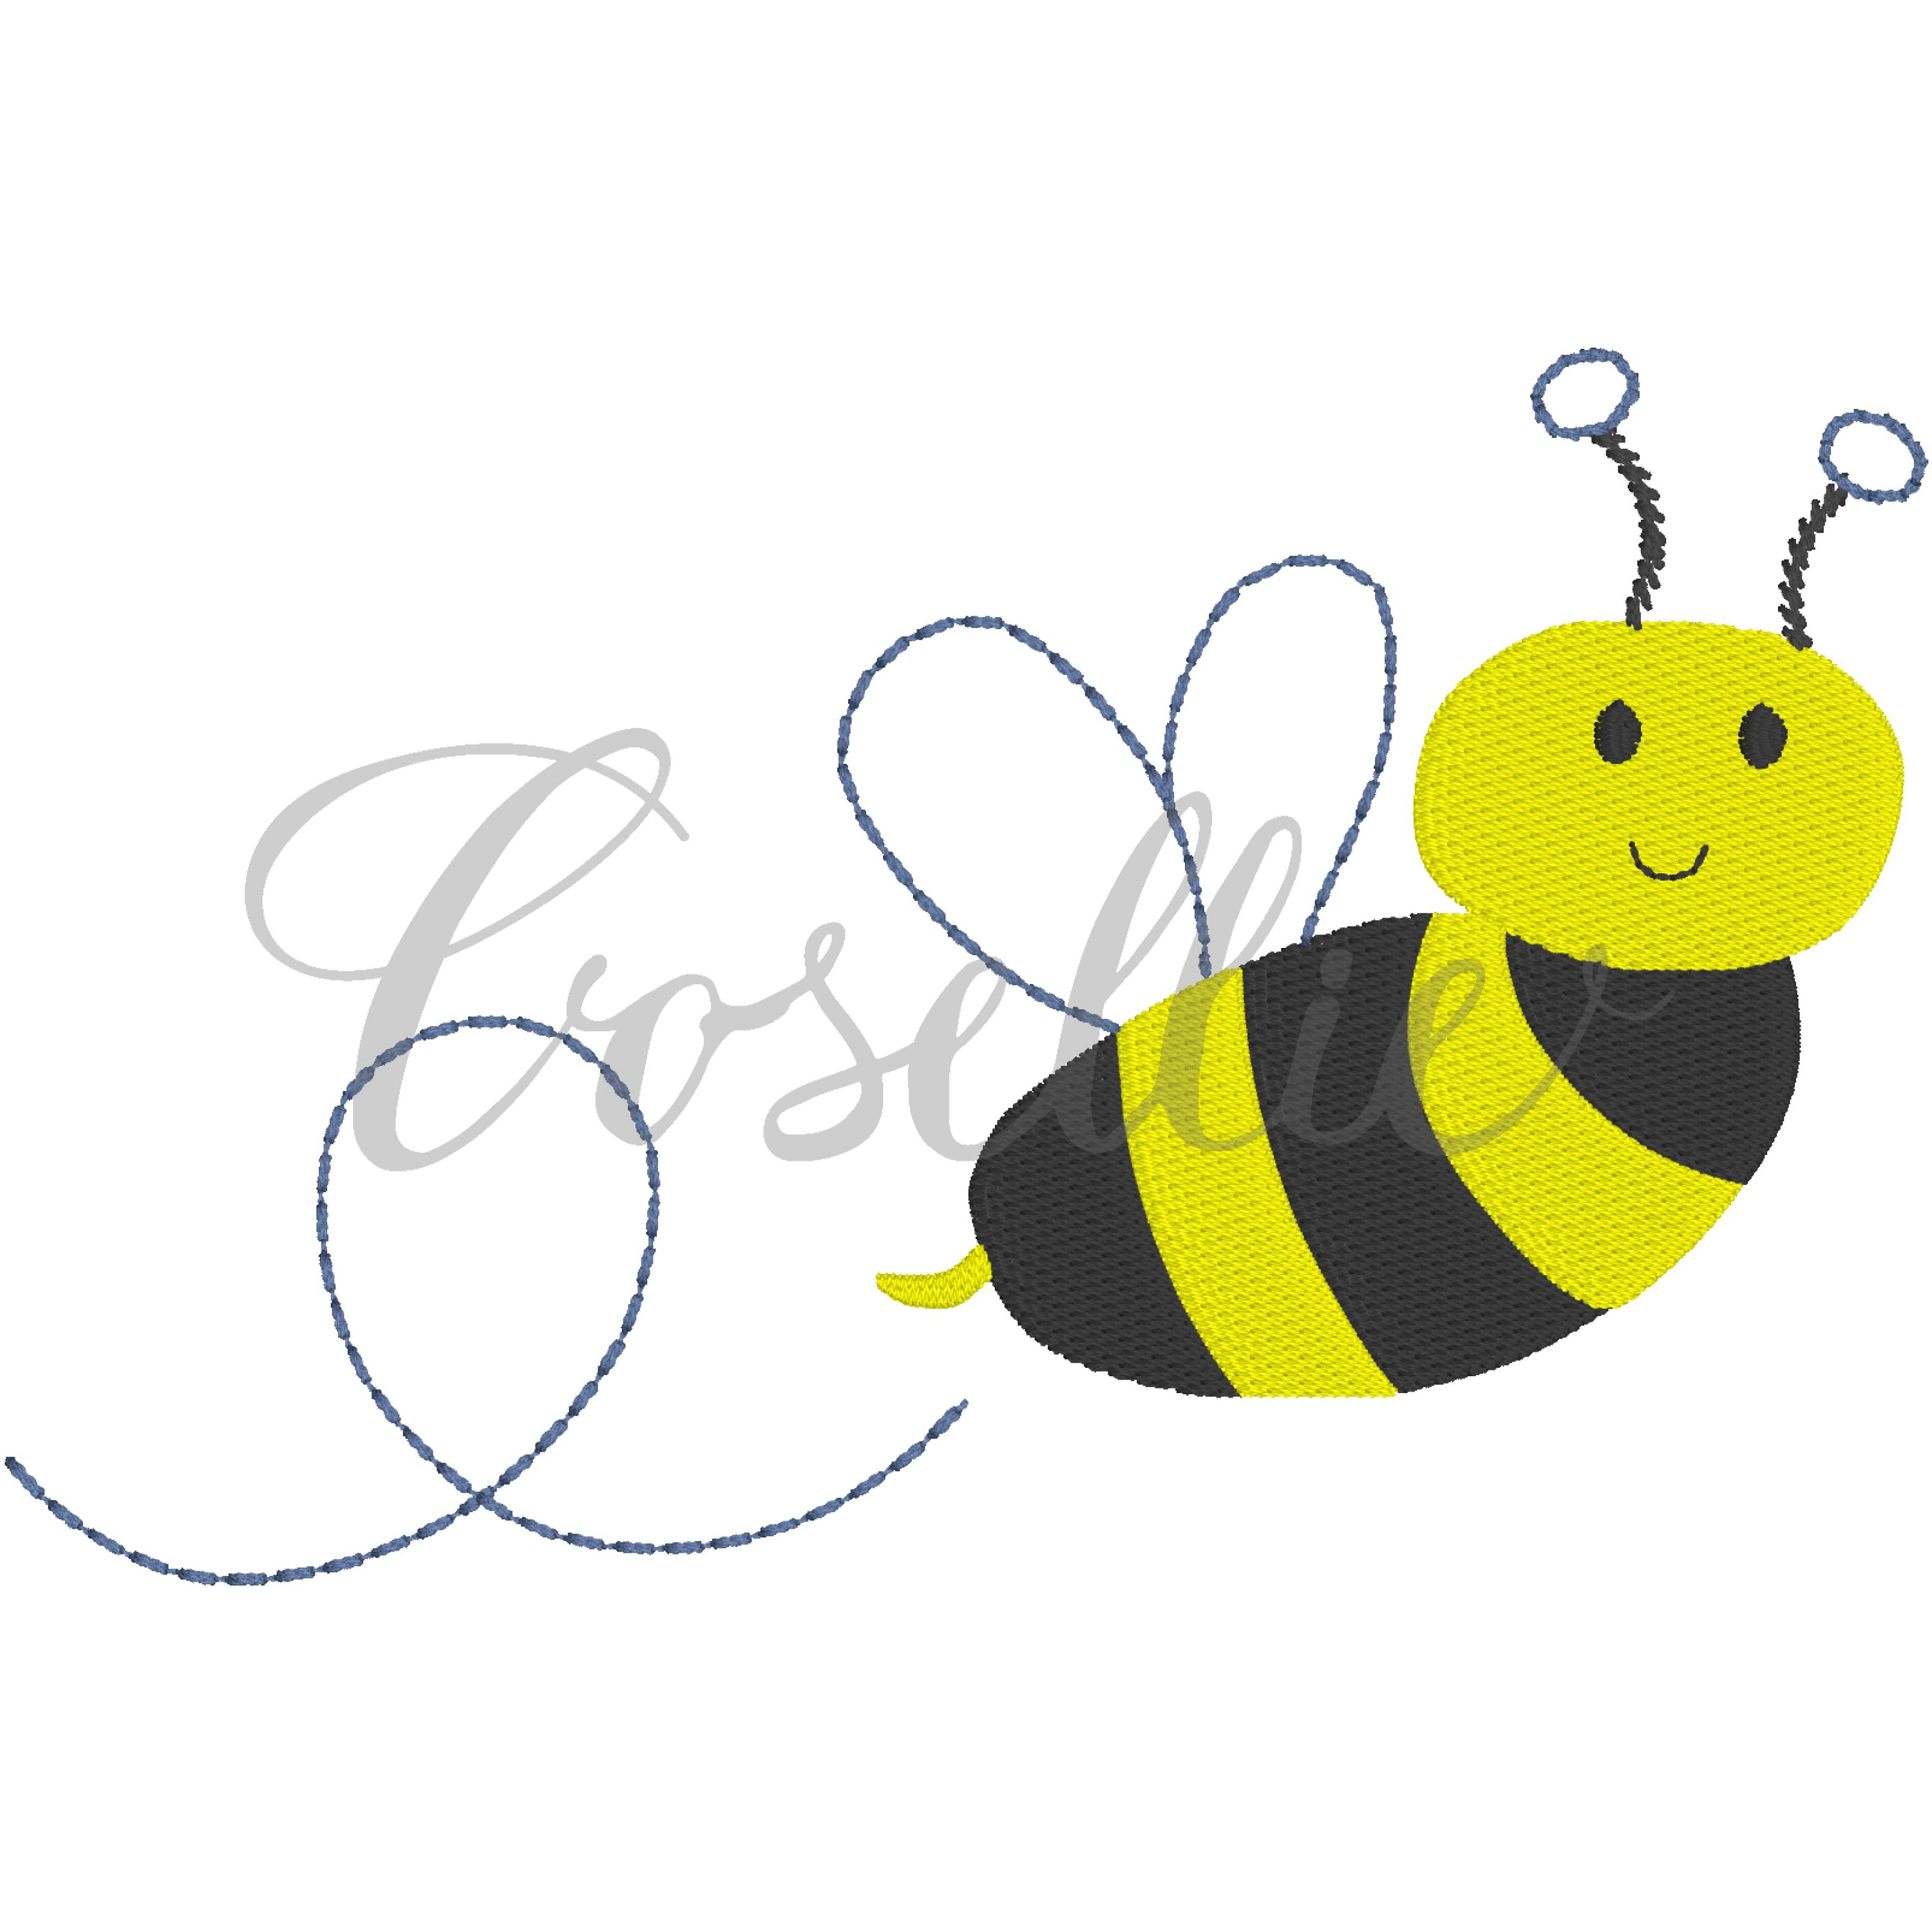 Bumble Bee Embroidery Pattern Bee Embroidery Design Vintage Bee Embroidery Design Simple Bee Embroidery Design Bumble Bee Ba Bee